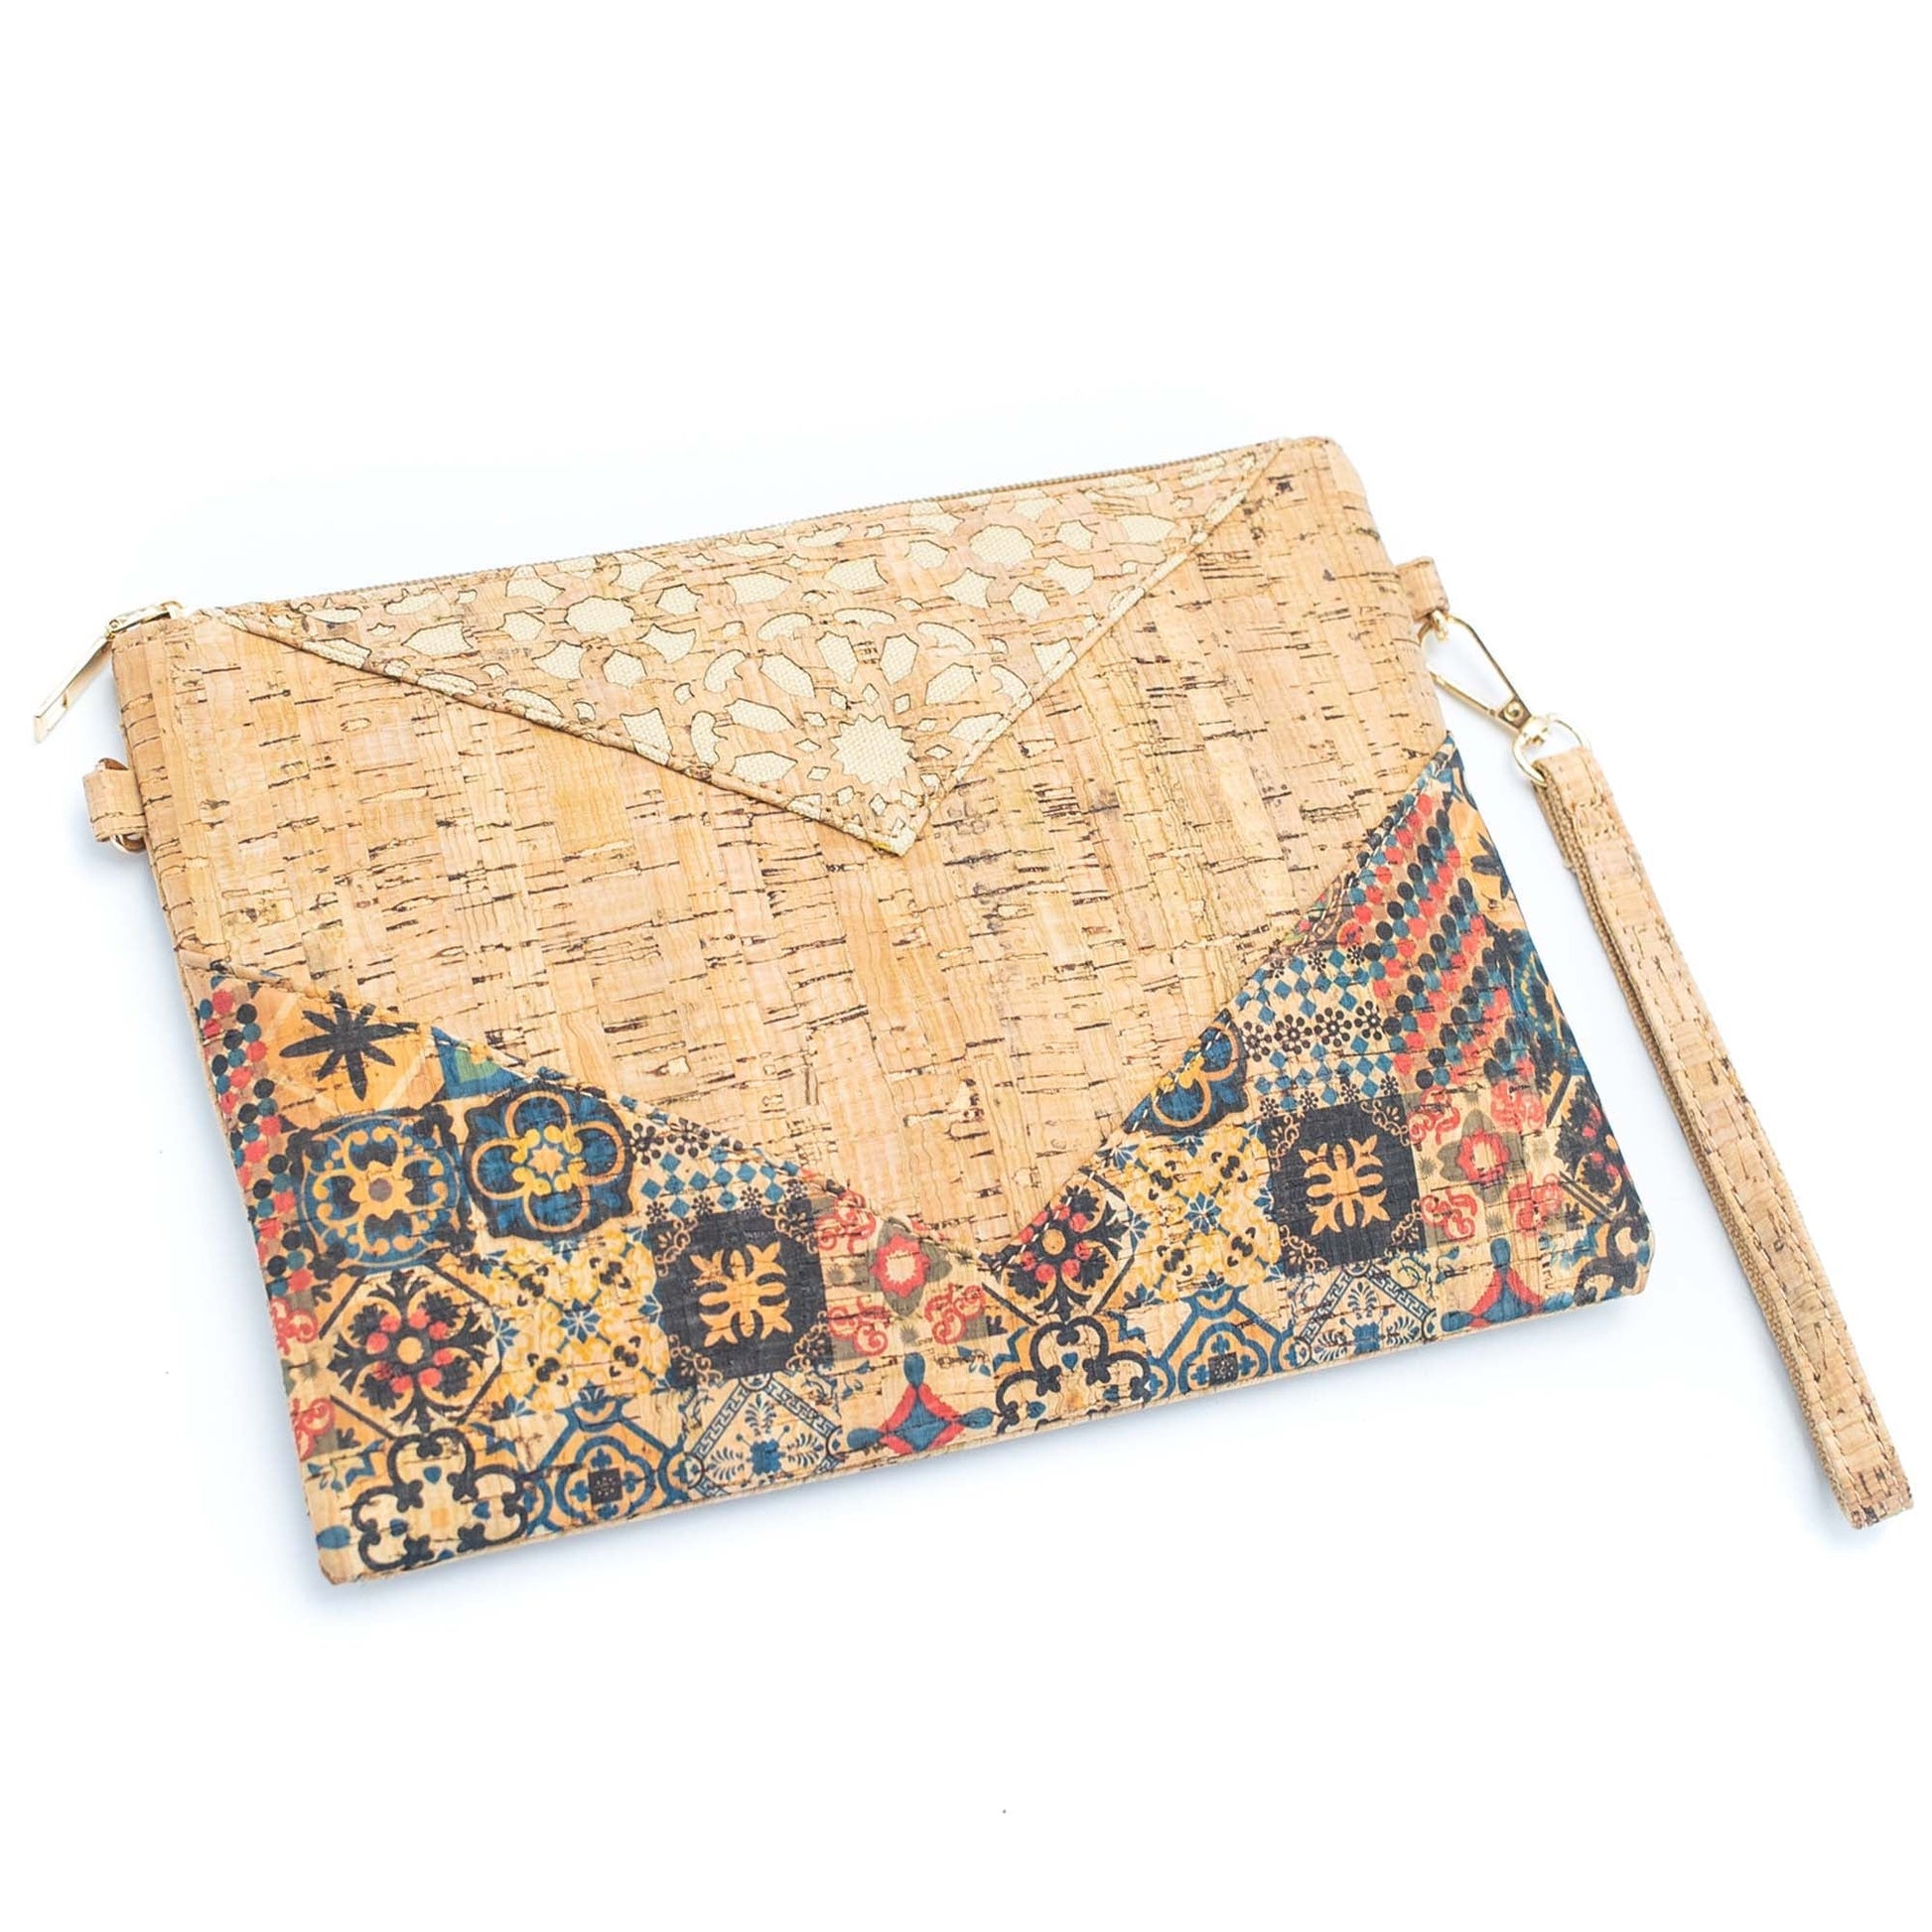 Arrow Patterned Natural Cork Vegan Sling Bags | THE CORK COLLECTION